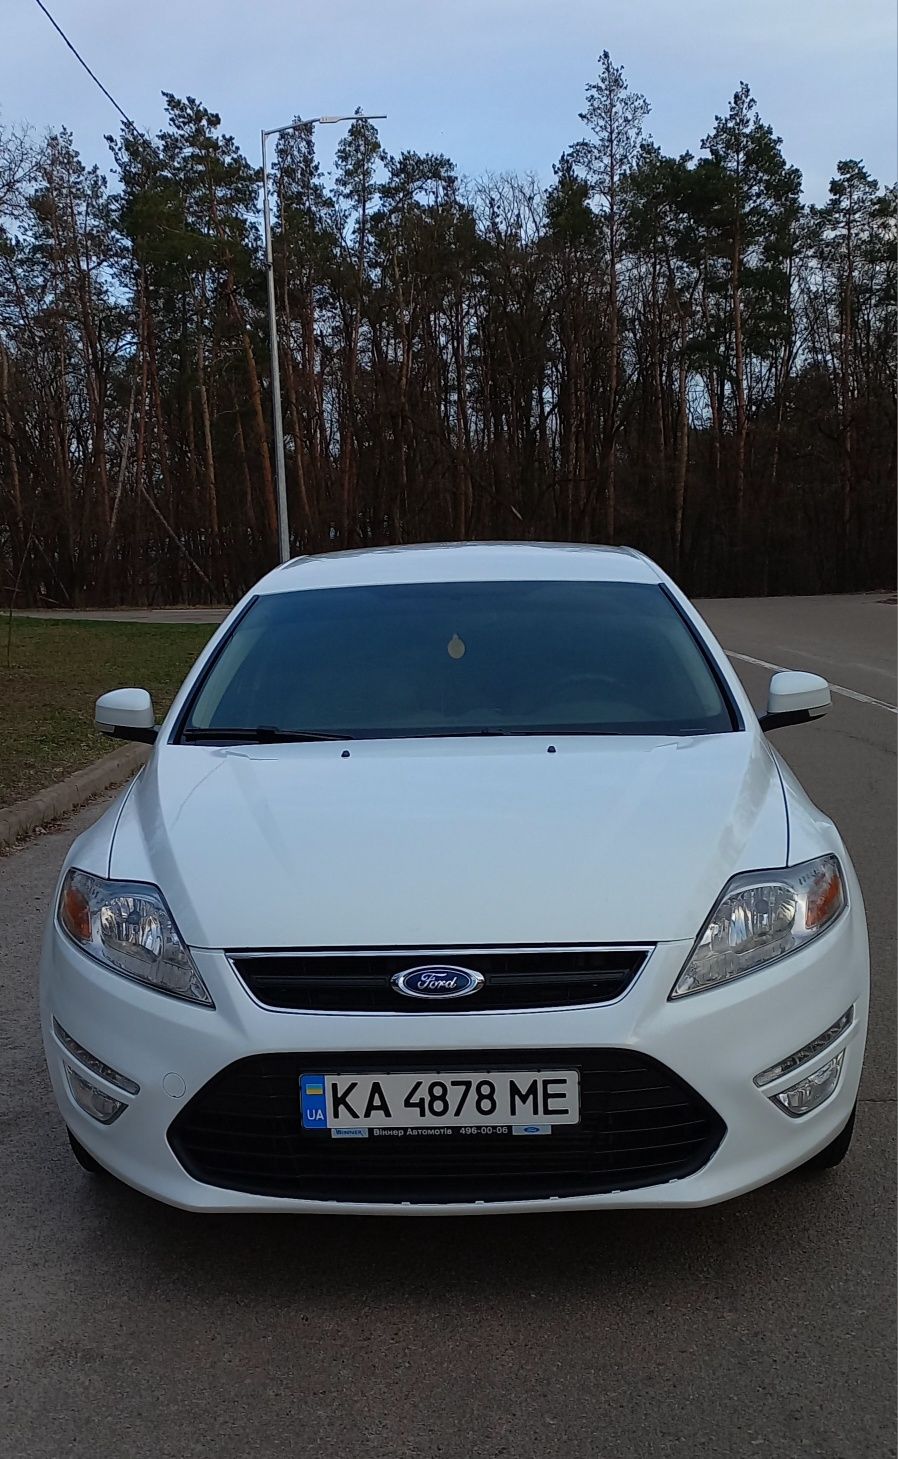 Ford Mondeo 4 2.0 tdci